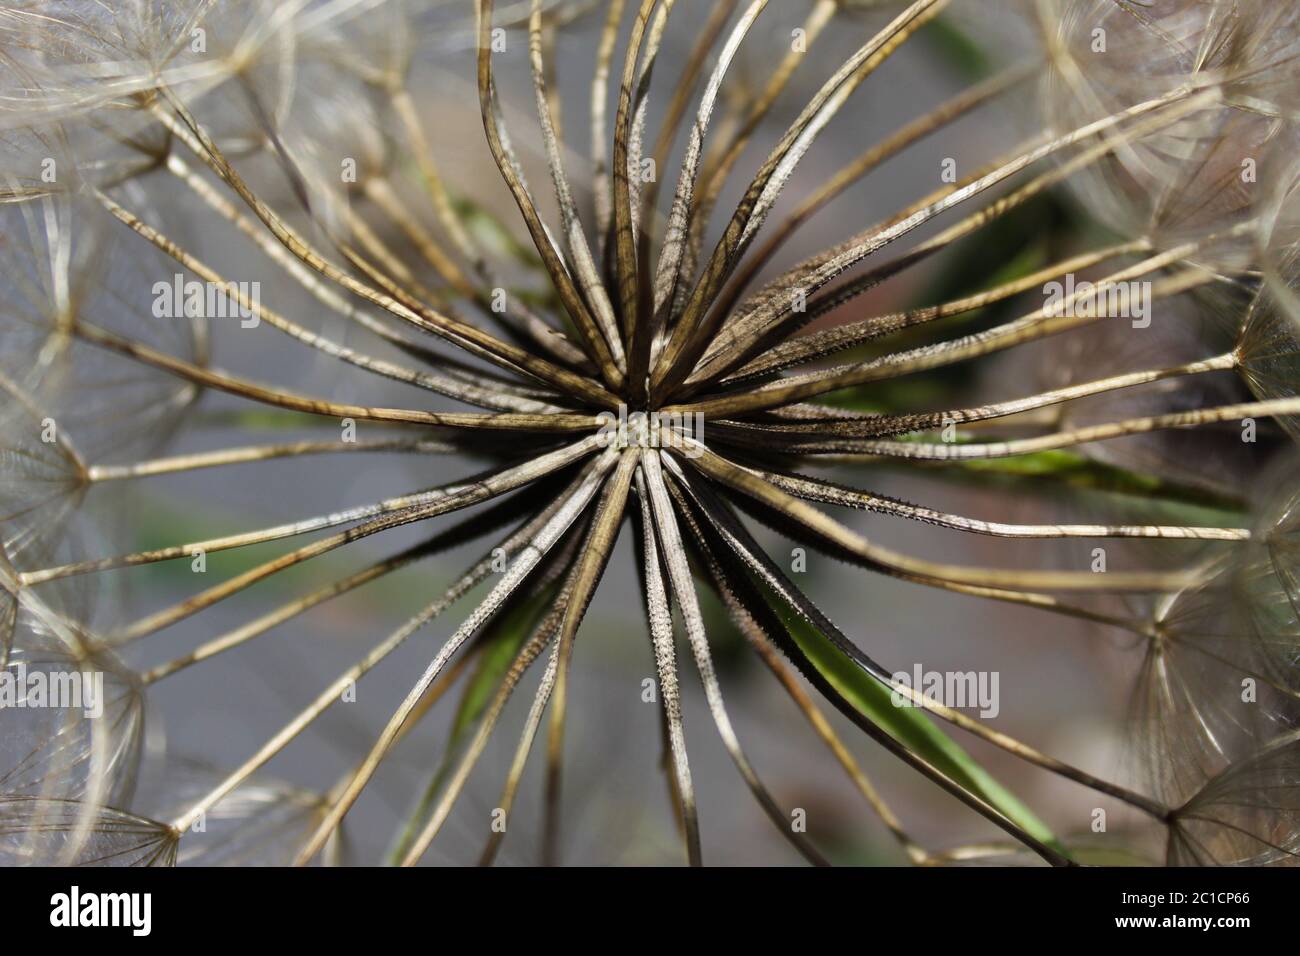 Close-up of seeded dandelion head, symbol of possibility, hope, and dreams. Good image for sympathy, get-well soon, or thinking of you greeting card. Stock Photo